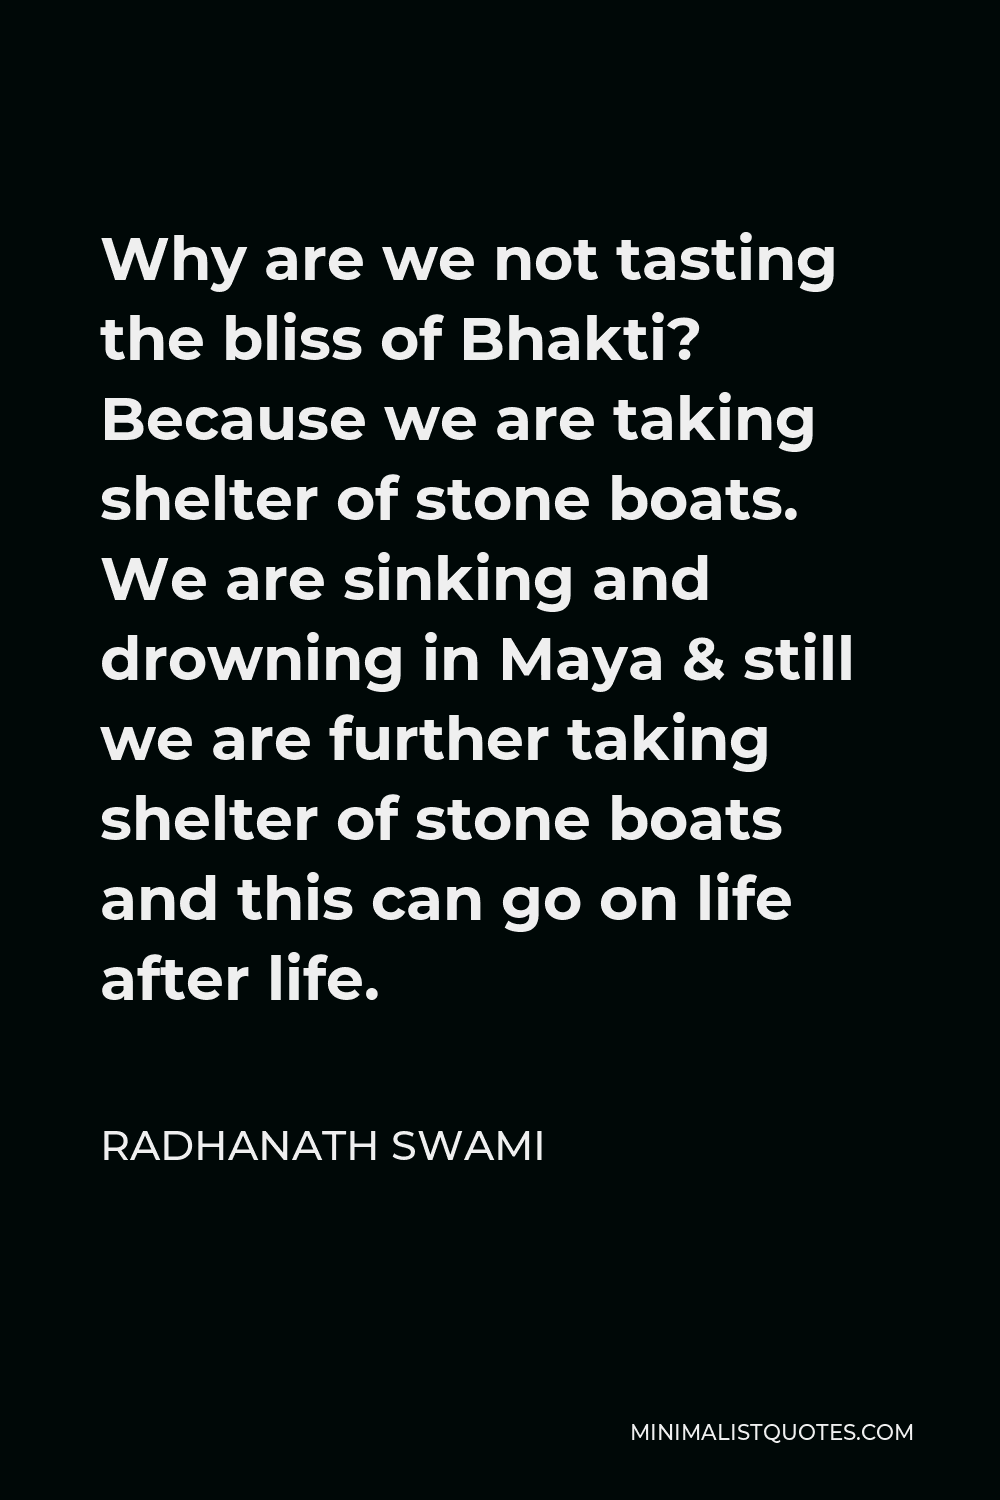 Radhanath Swami Quote - Why are we not tasting the bliss of Bhakti? Because we are taking shelter of stone boats. We are sinking and drowning in Maya & still we are further taking shelter of stone boats and this can go on life after life.